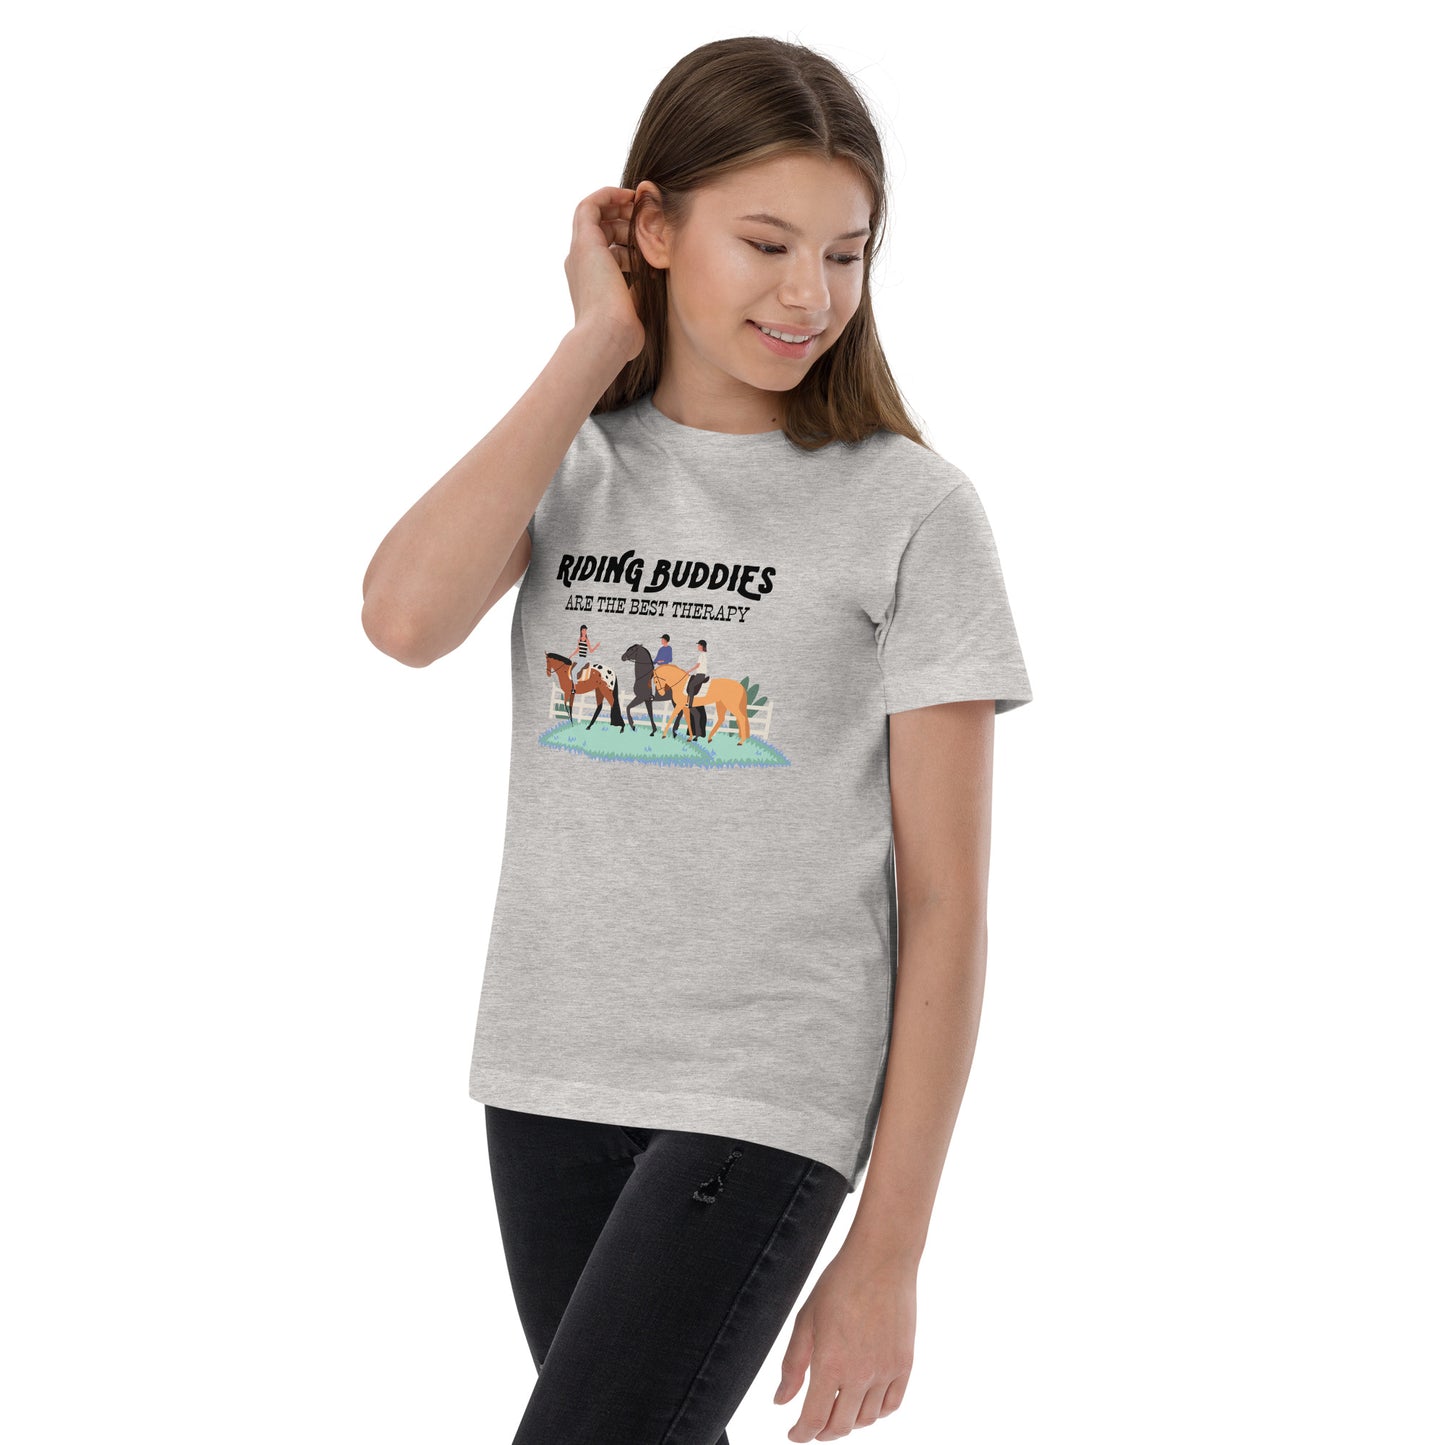 Riding Buddies Are The Best Therapy Youth Tee - Crew Neck, Youth Sizes - Equestrian Apparel - Horse Lover Gift - Equine Fashion